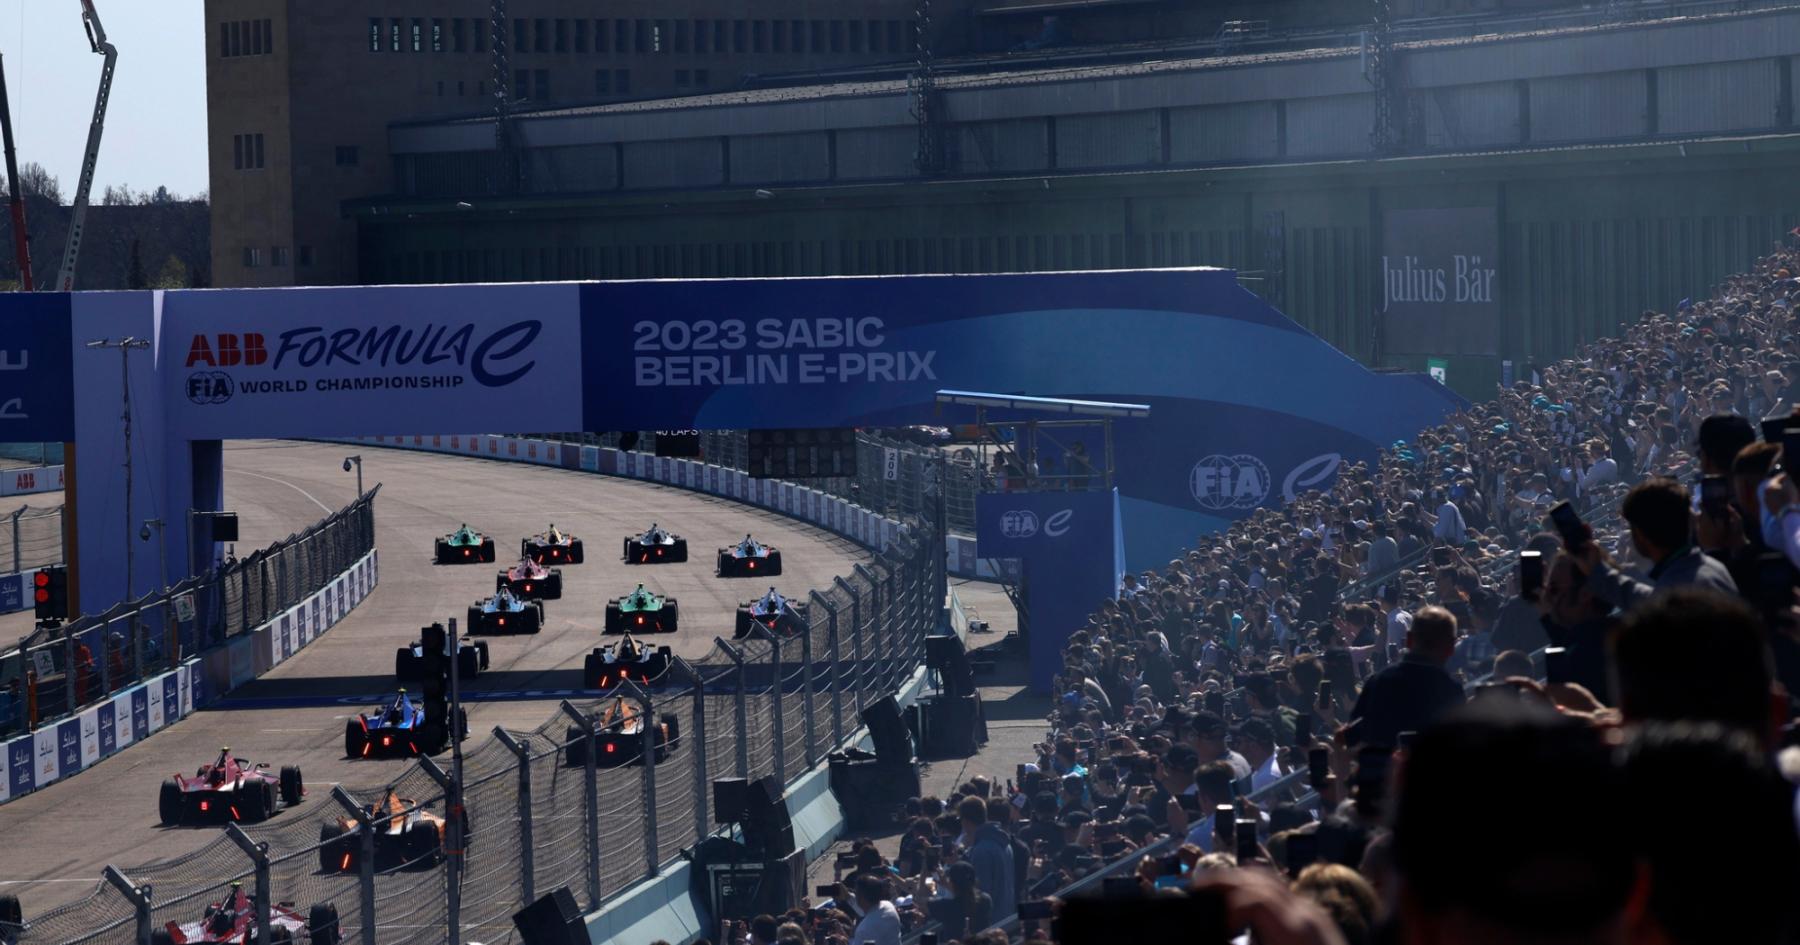 Homecoming Hero: Pascal Wehrlein's Moment to Shine at the Berlin E-Prix